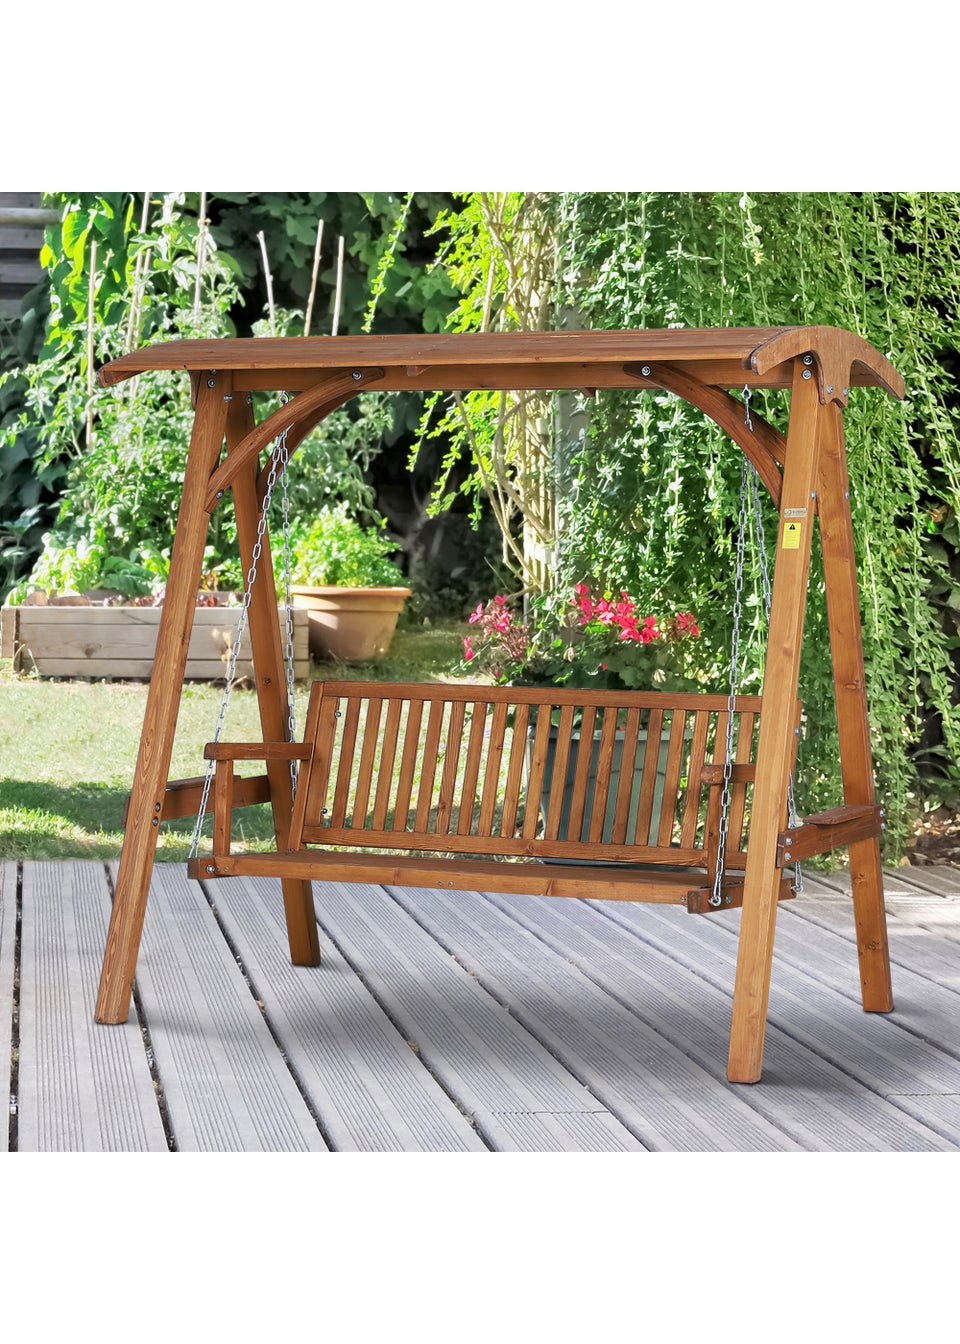 Outsunny Sand 3 Seater Wooden Garden Swing Chair (200cm x 125cm x 185cm)